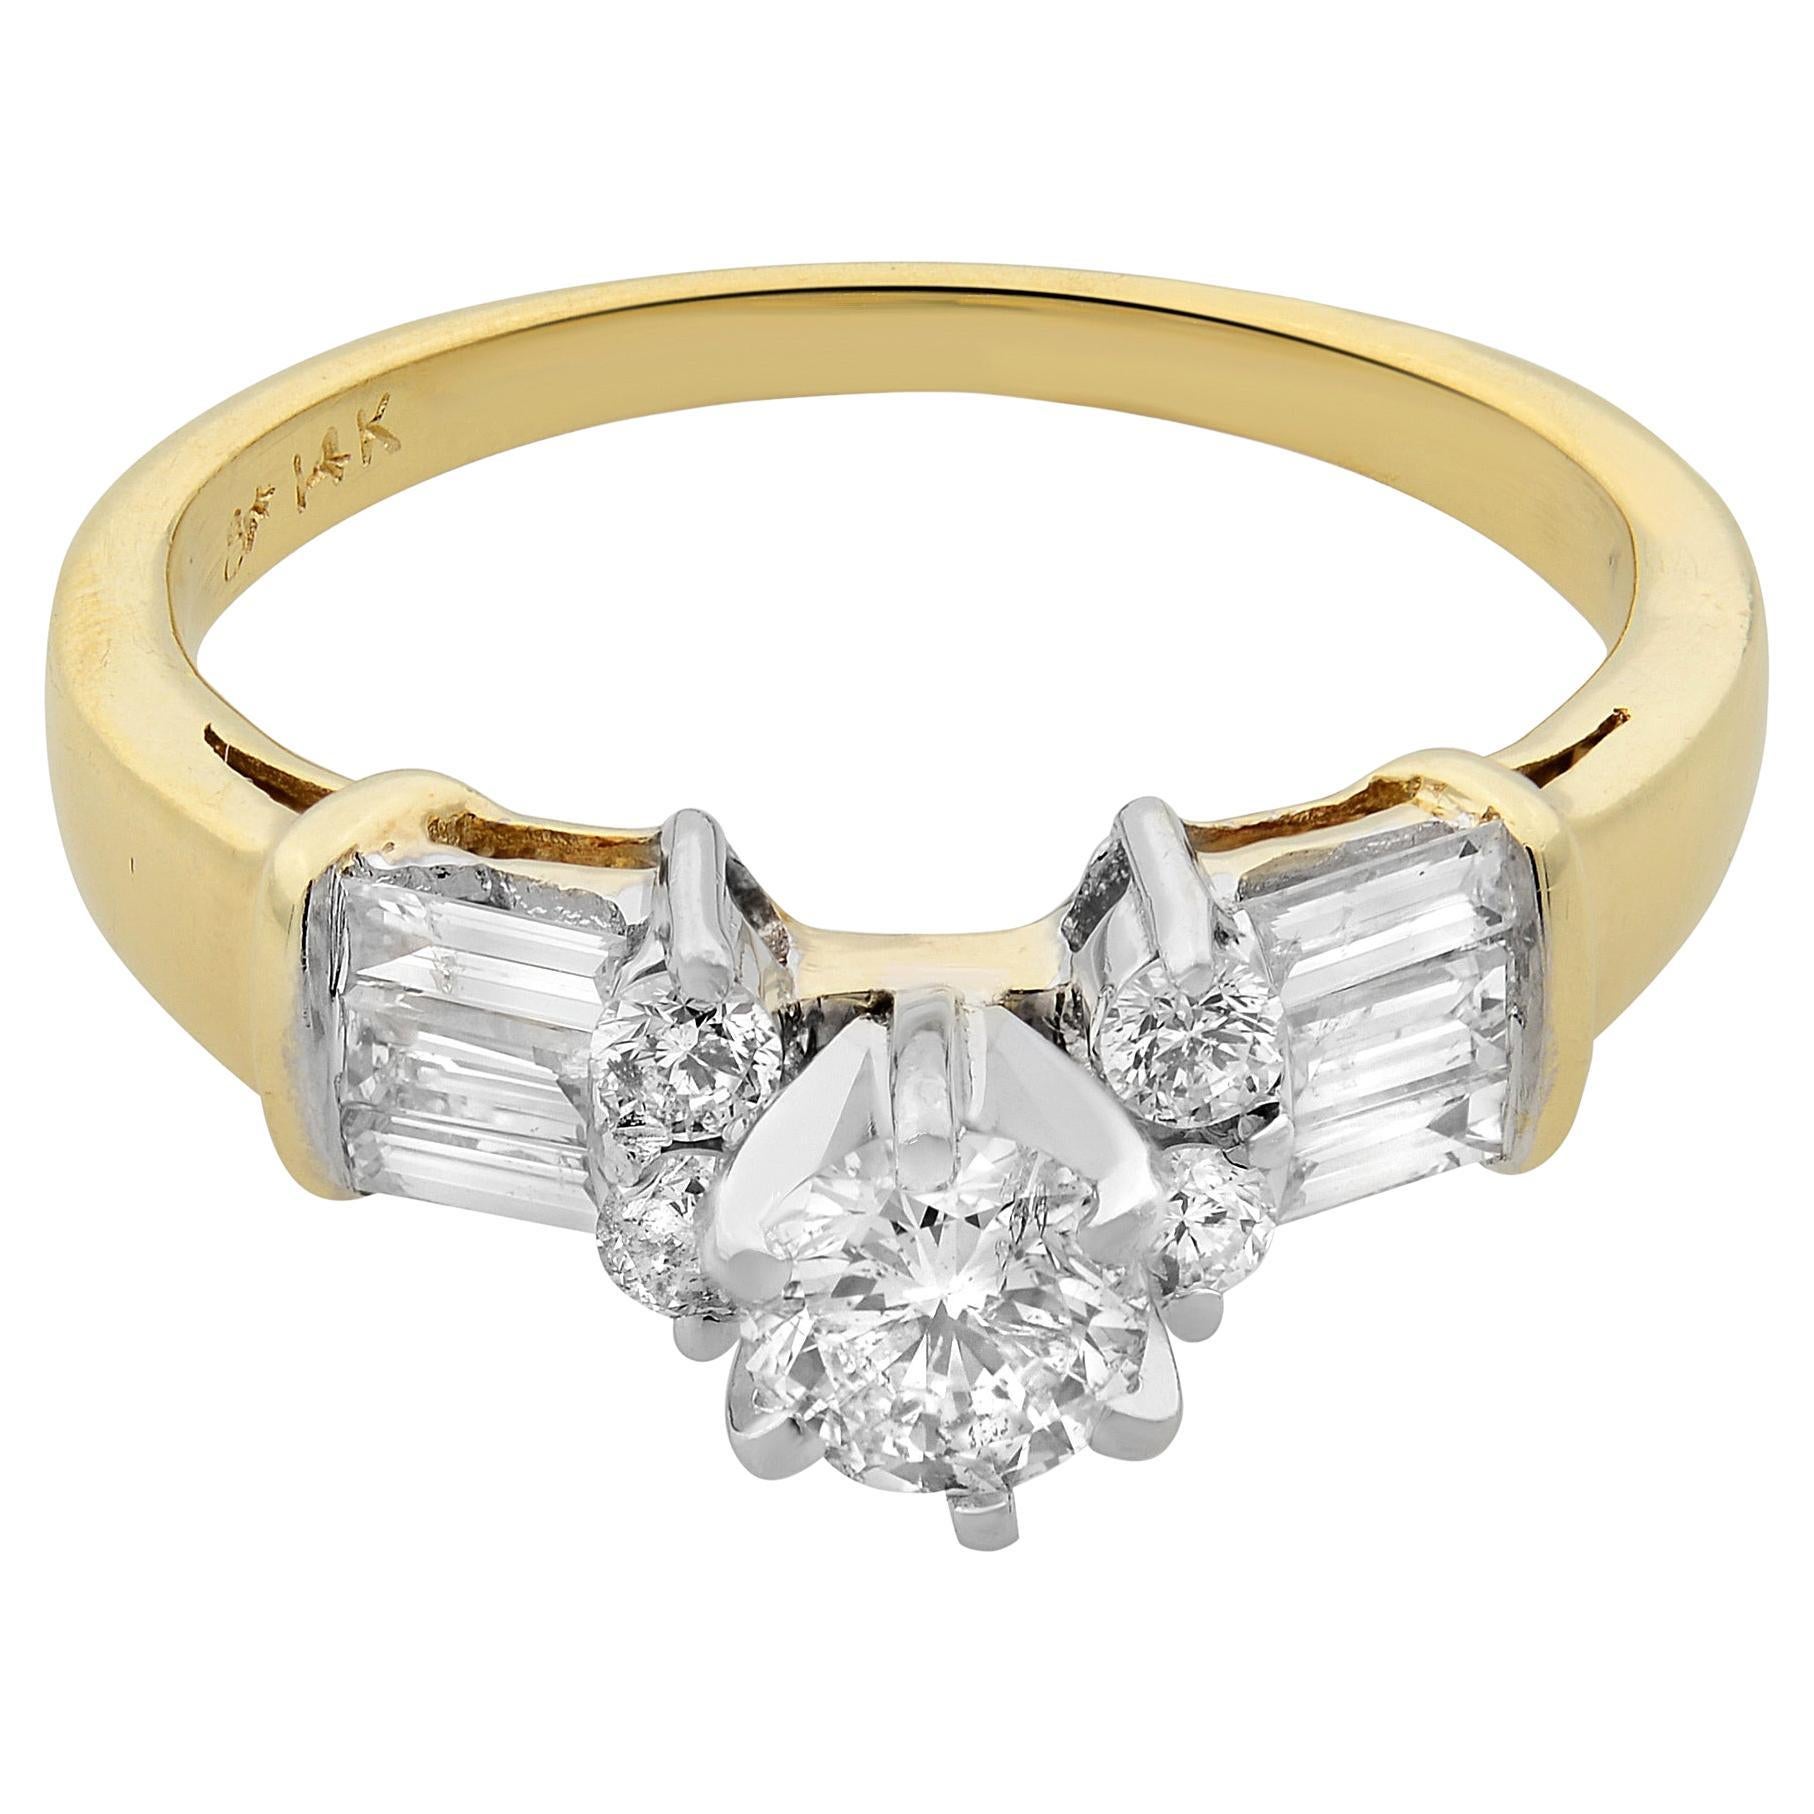 1.00Cttw Round & Baguette Cut Diamond Engagement Ring 14K Yellow Gold Size 6.5 For Sale